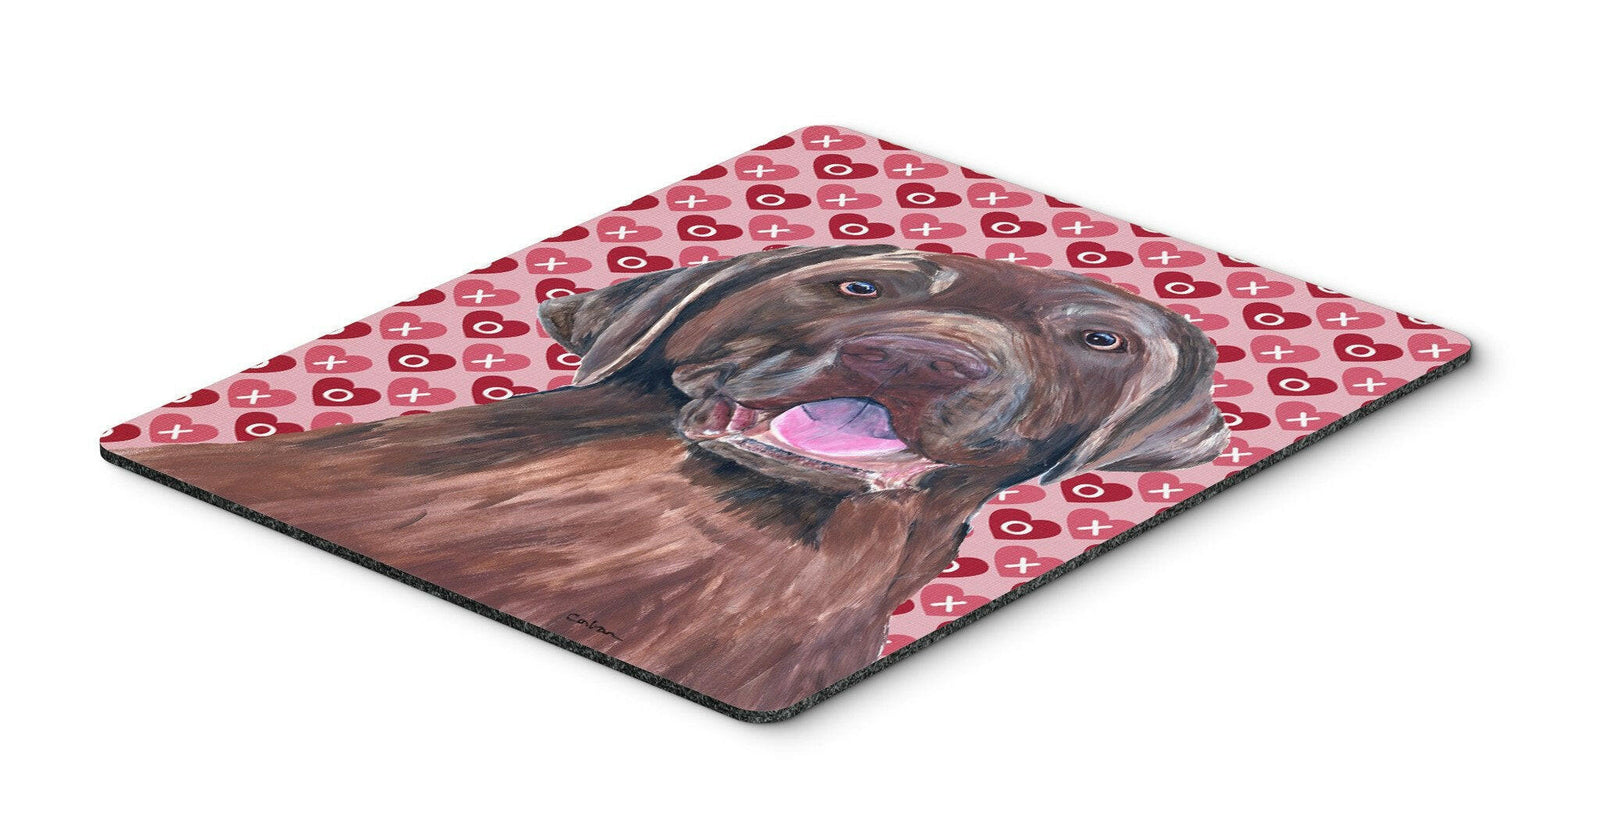 Labrador Chocolate Hearts Love and Valentine's Day Mouse Pad, Hot Pad or Trivet by Caroline's Treasures